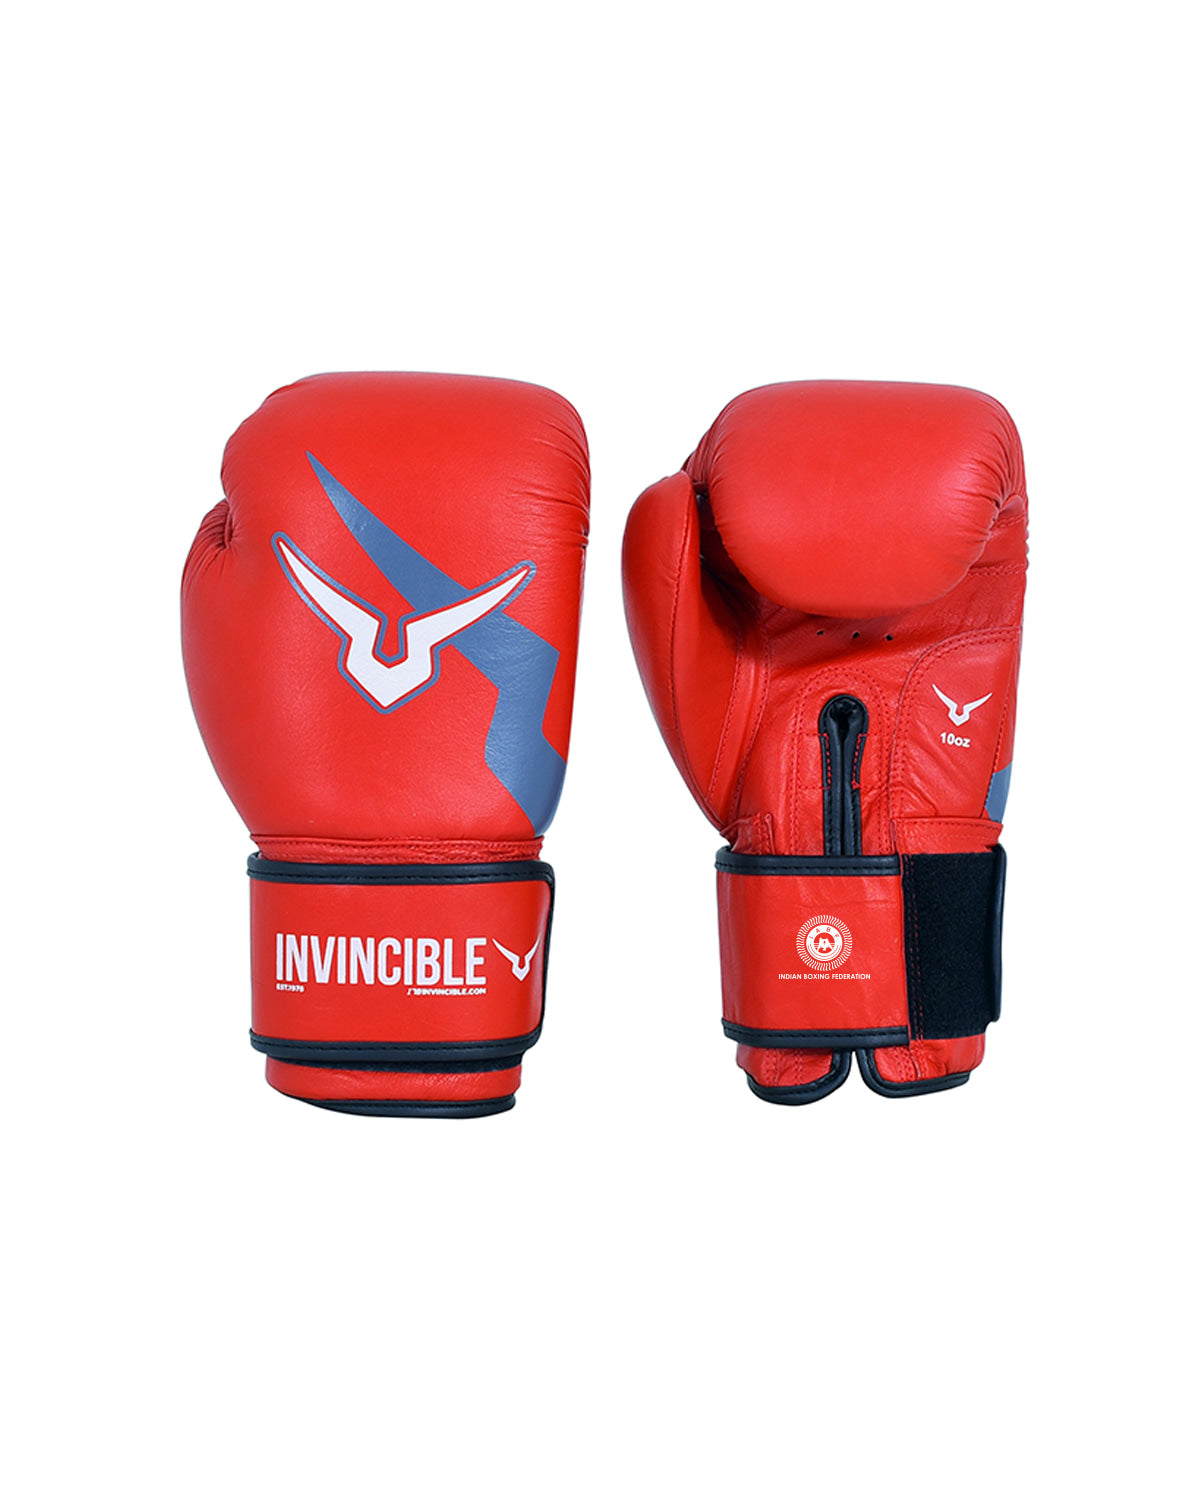 Invincible Extreme Competition Boxing Gloves Approved by IABF